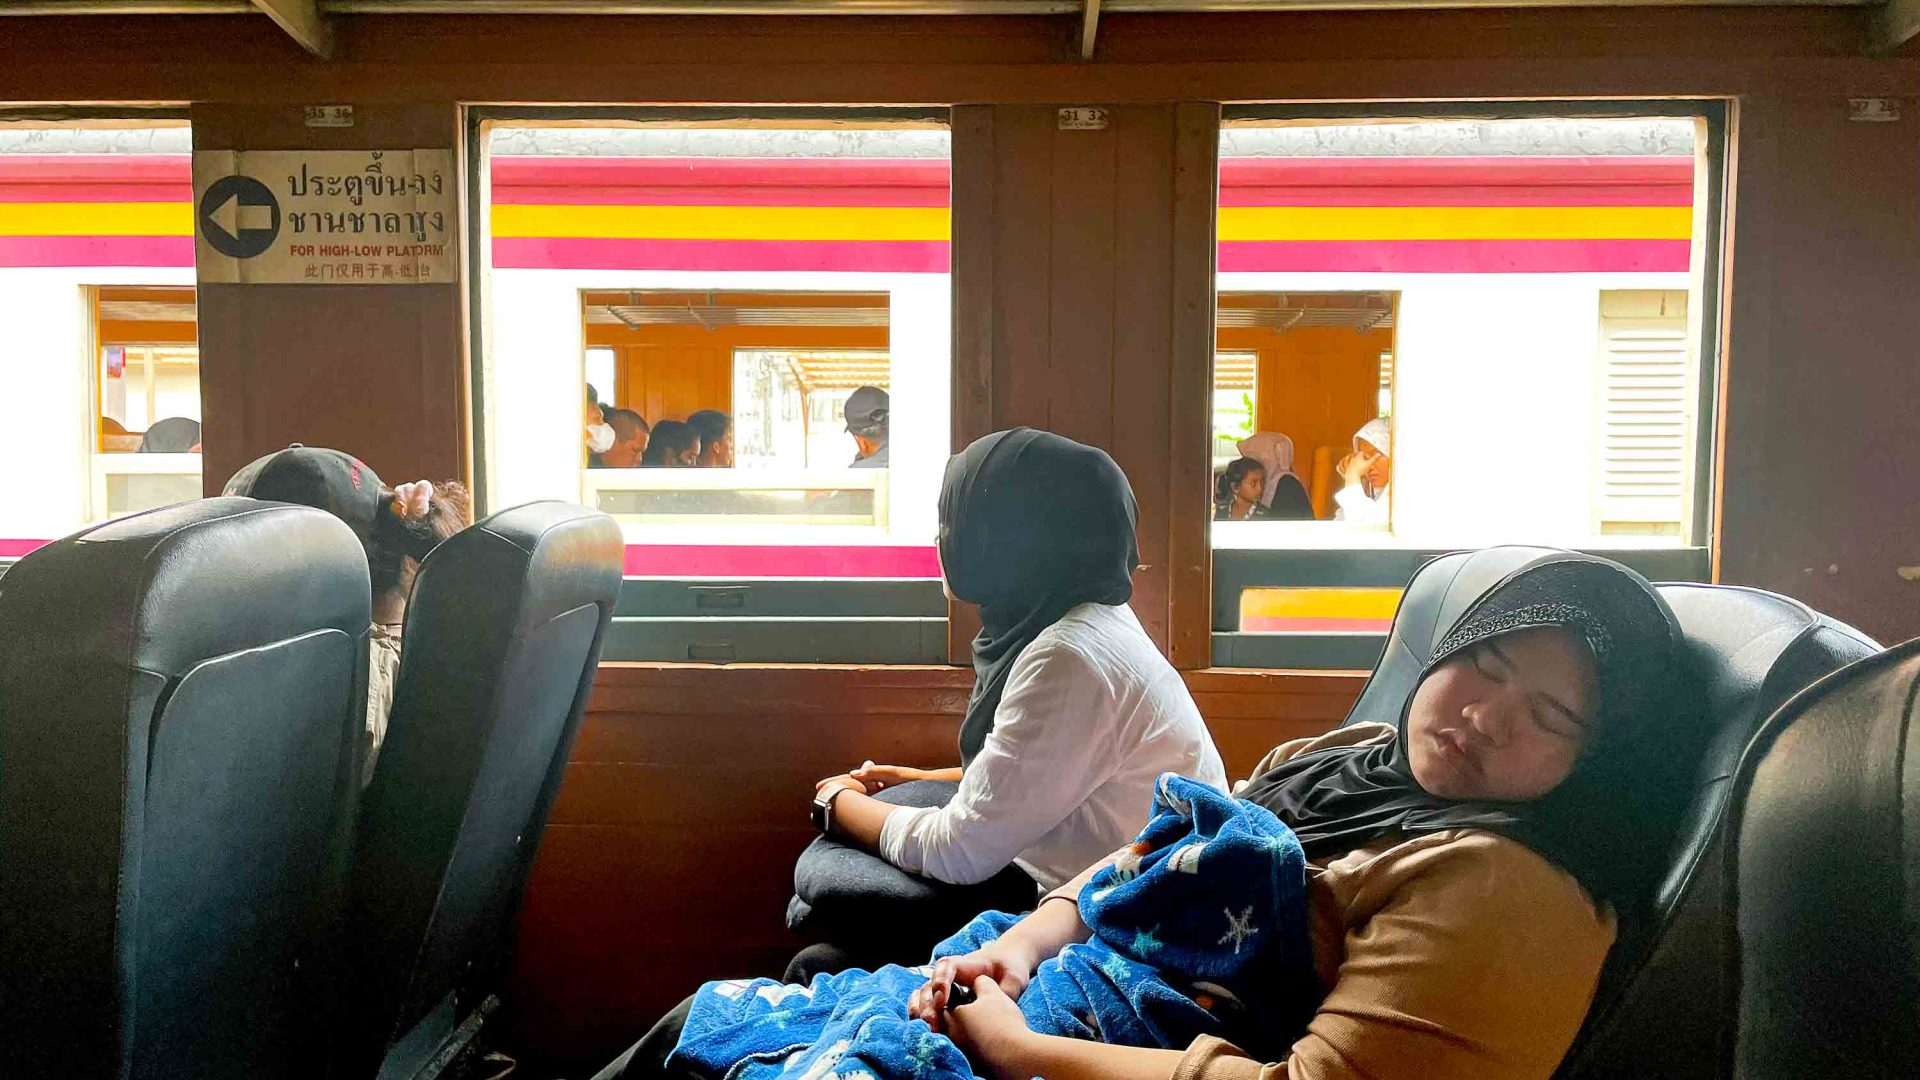 A person sleeps in one of the train carriages.